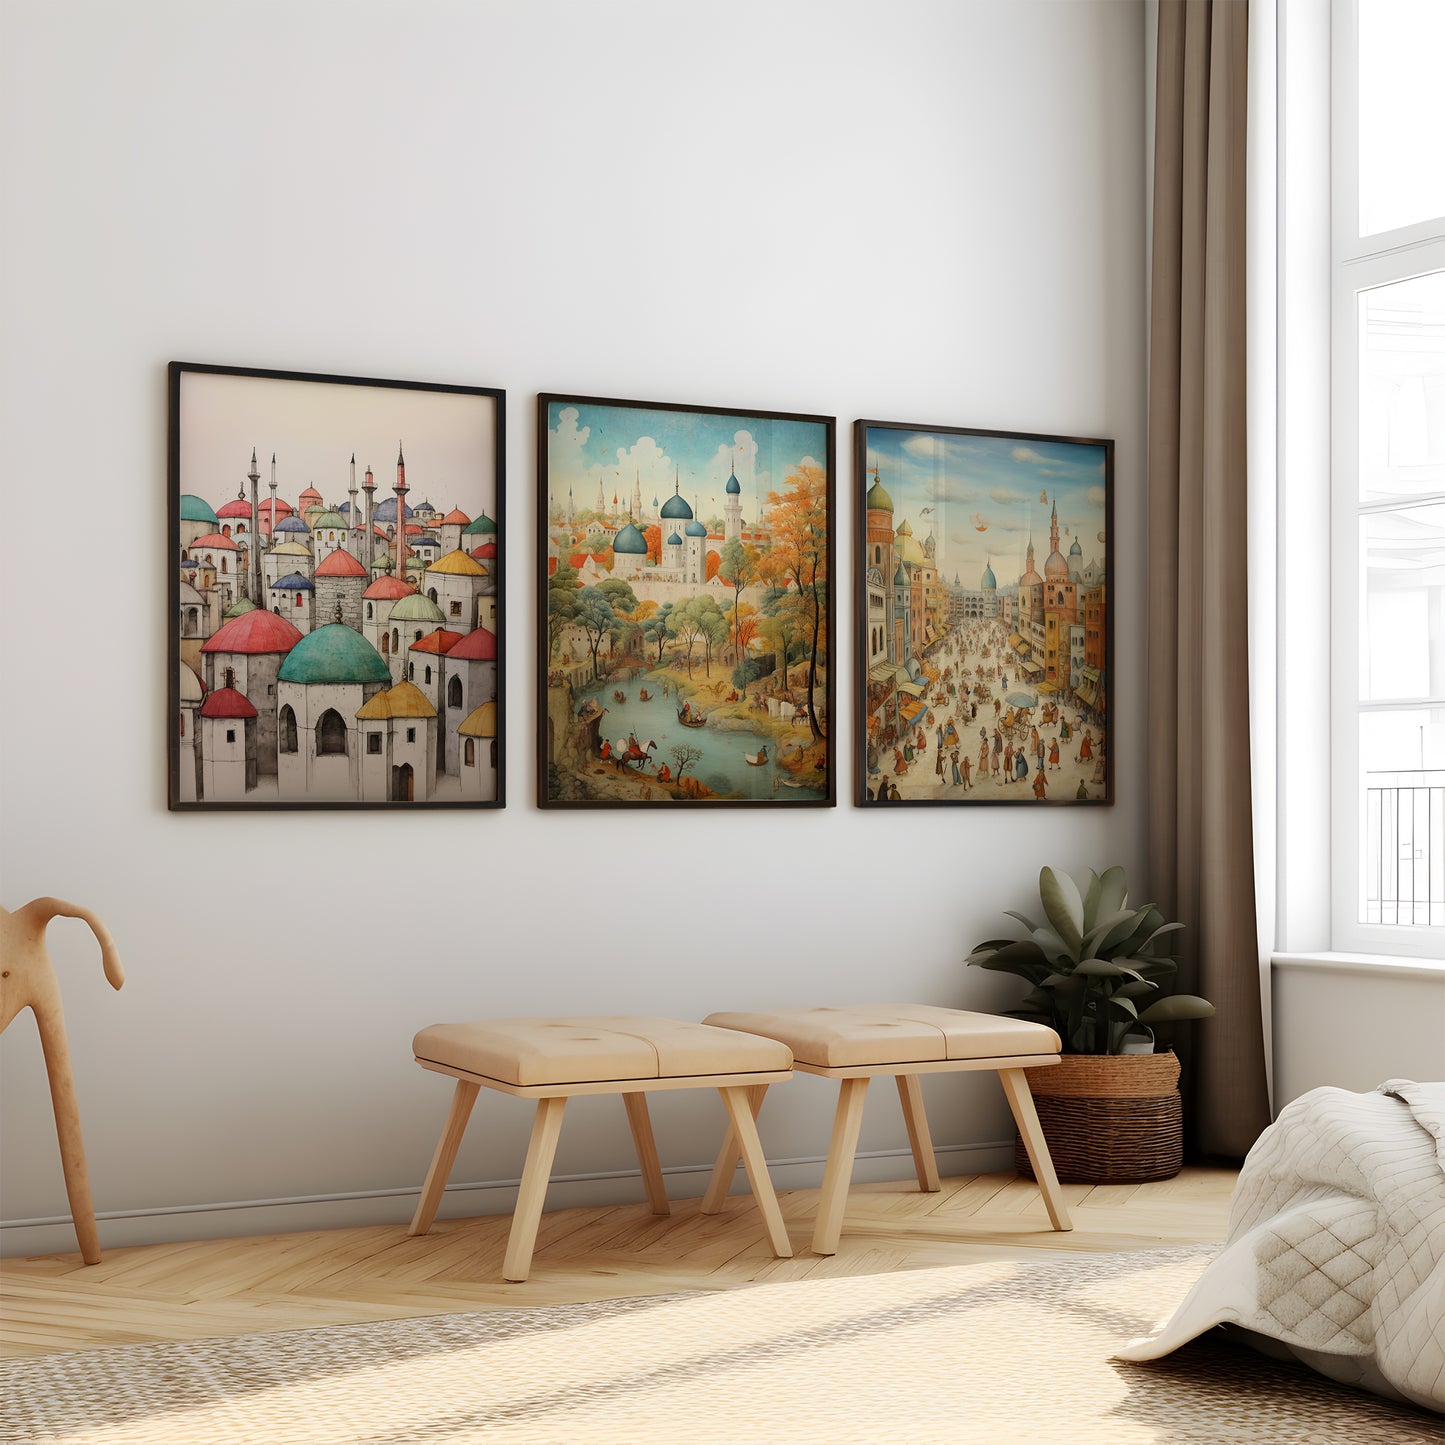 Vintage Istabul (Framed Art Collection - 14X18 inches each)